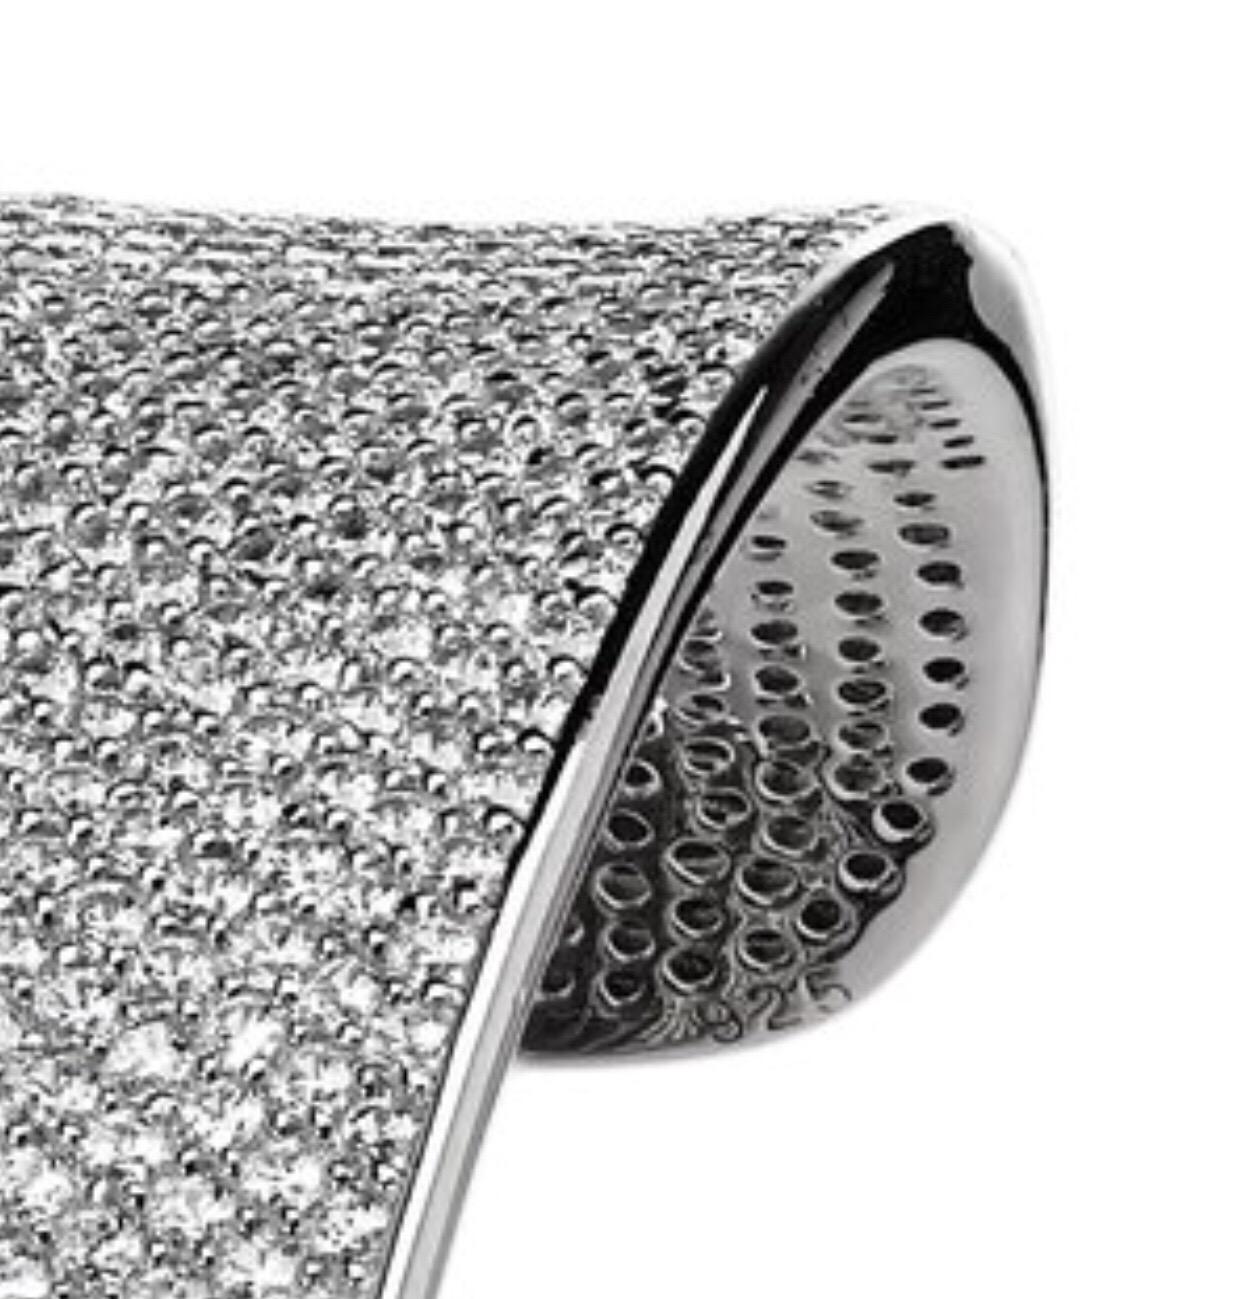 This spectacular micro-set cuff bangle is a guaranteed show stopper. Encrusted with over 2,500 of white round brilliant cut diamonds, this statement bangle has been handcrafted to the highest possible standard. Featuring 47.78 carat of white